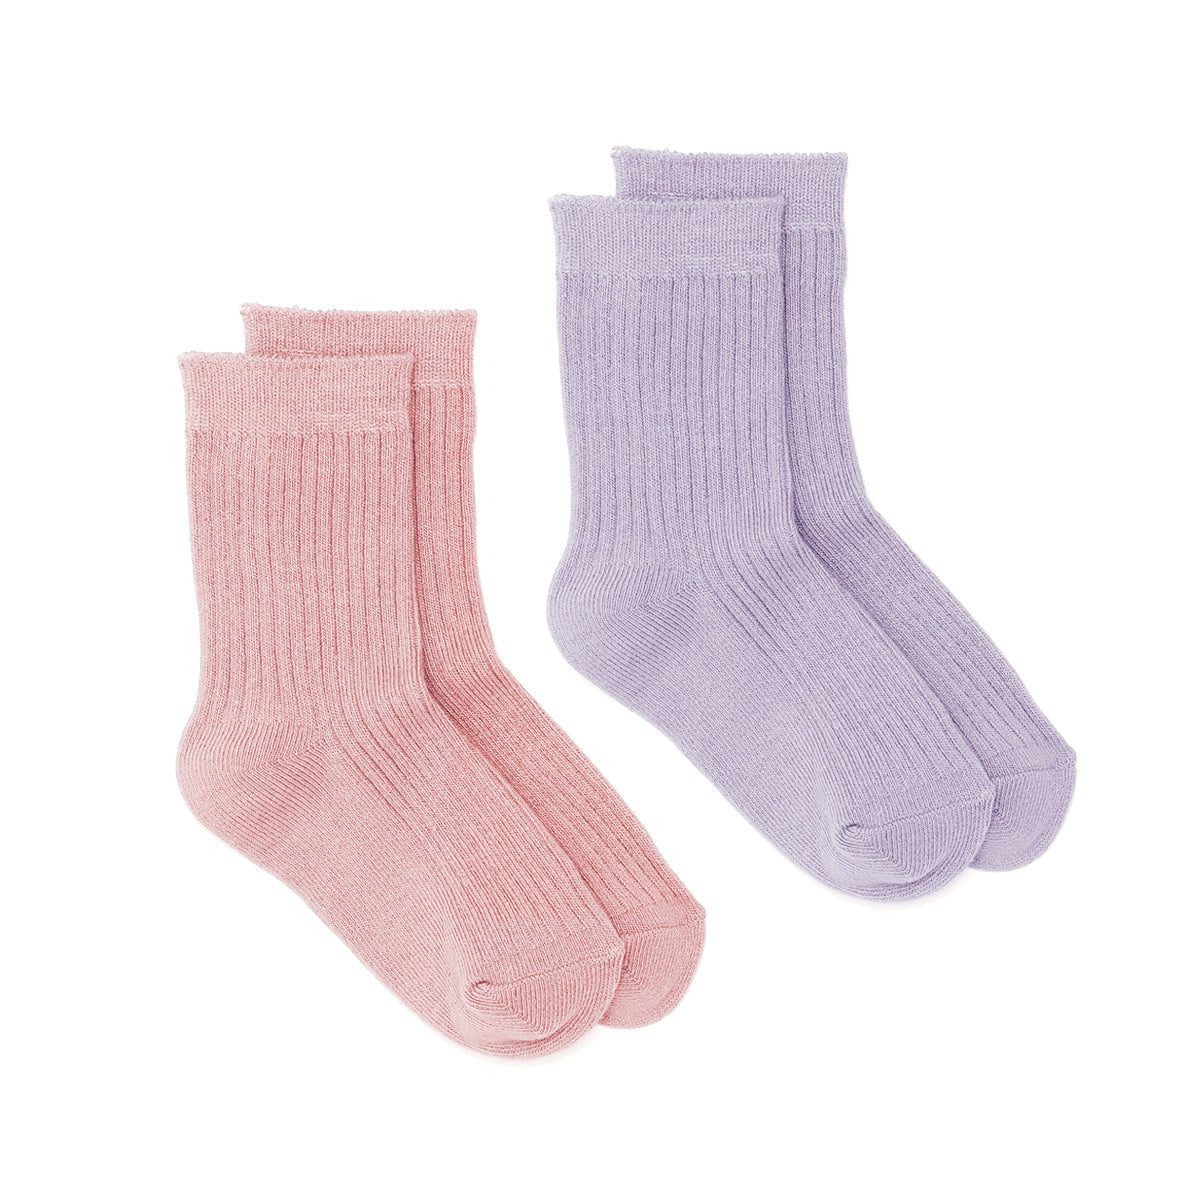 Jordan Socks, 2 Pack, Blush Lilac-Shoes-Crywolf Child-1/2Y-Little Soldiers